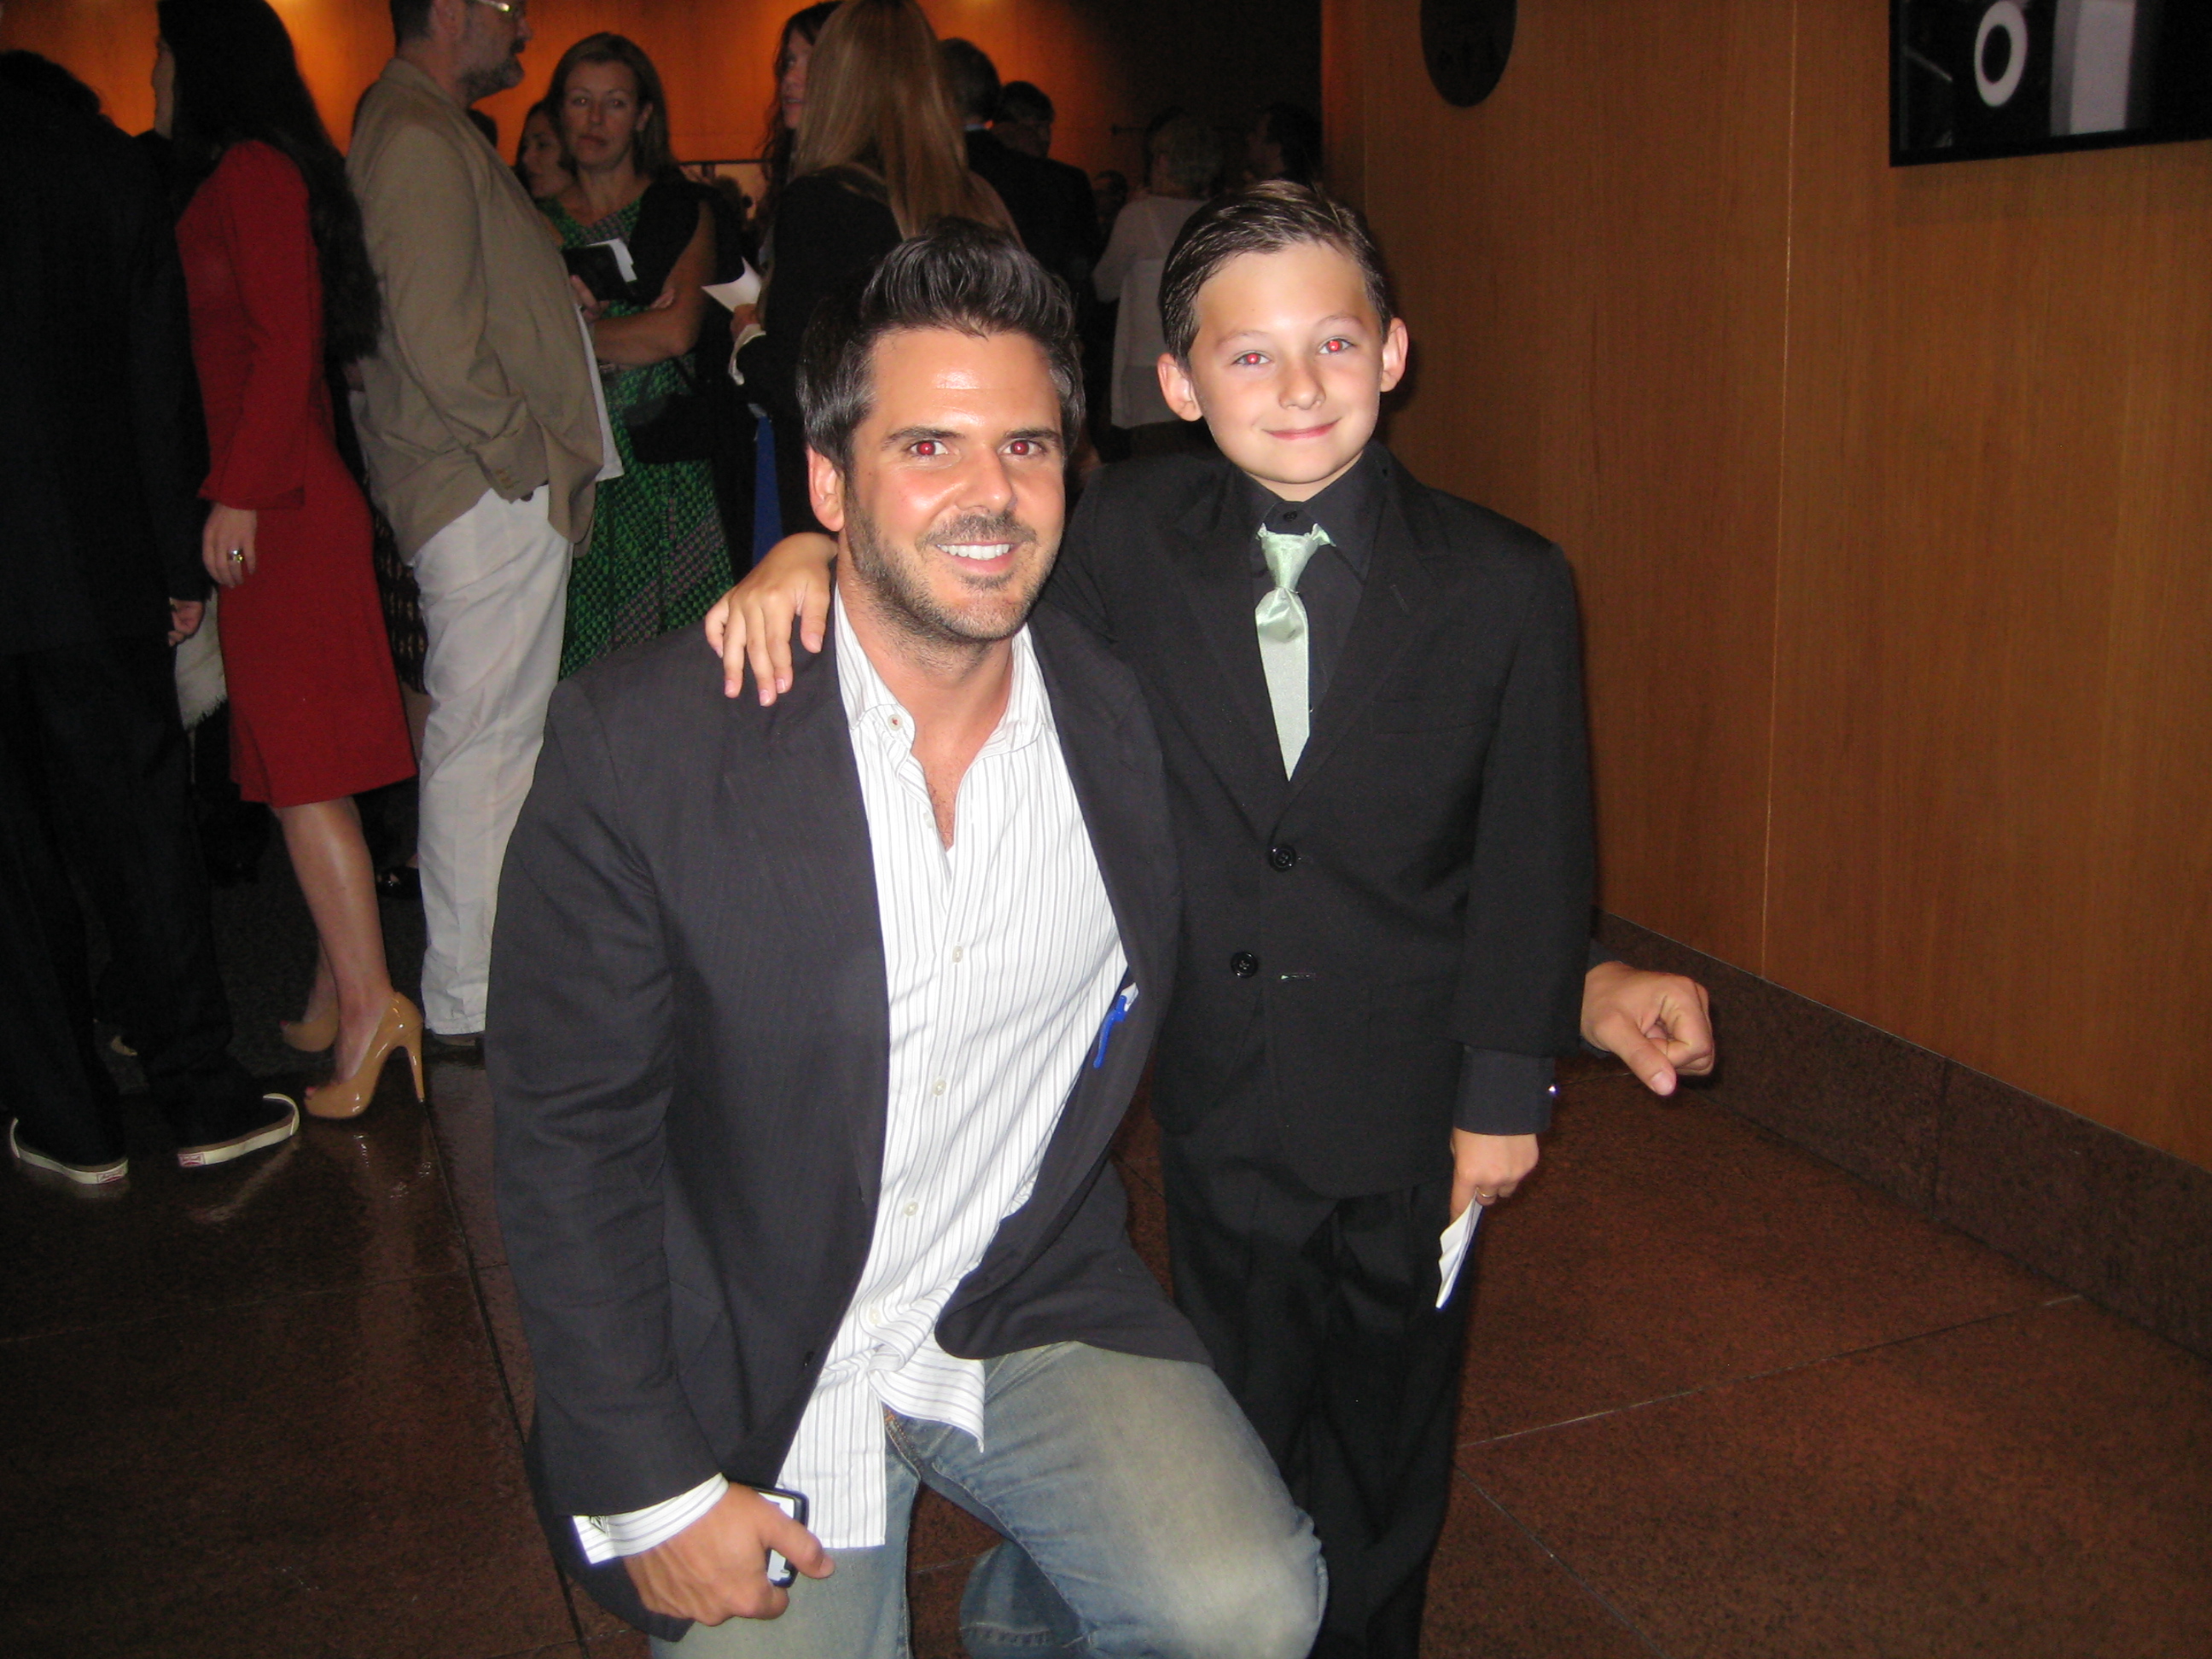 Jared and his Manager David Dean Portelli at the 